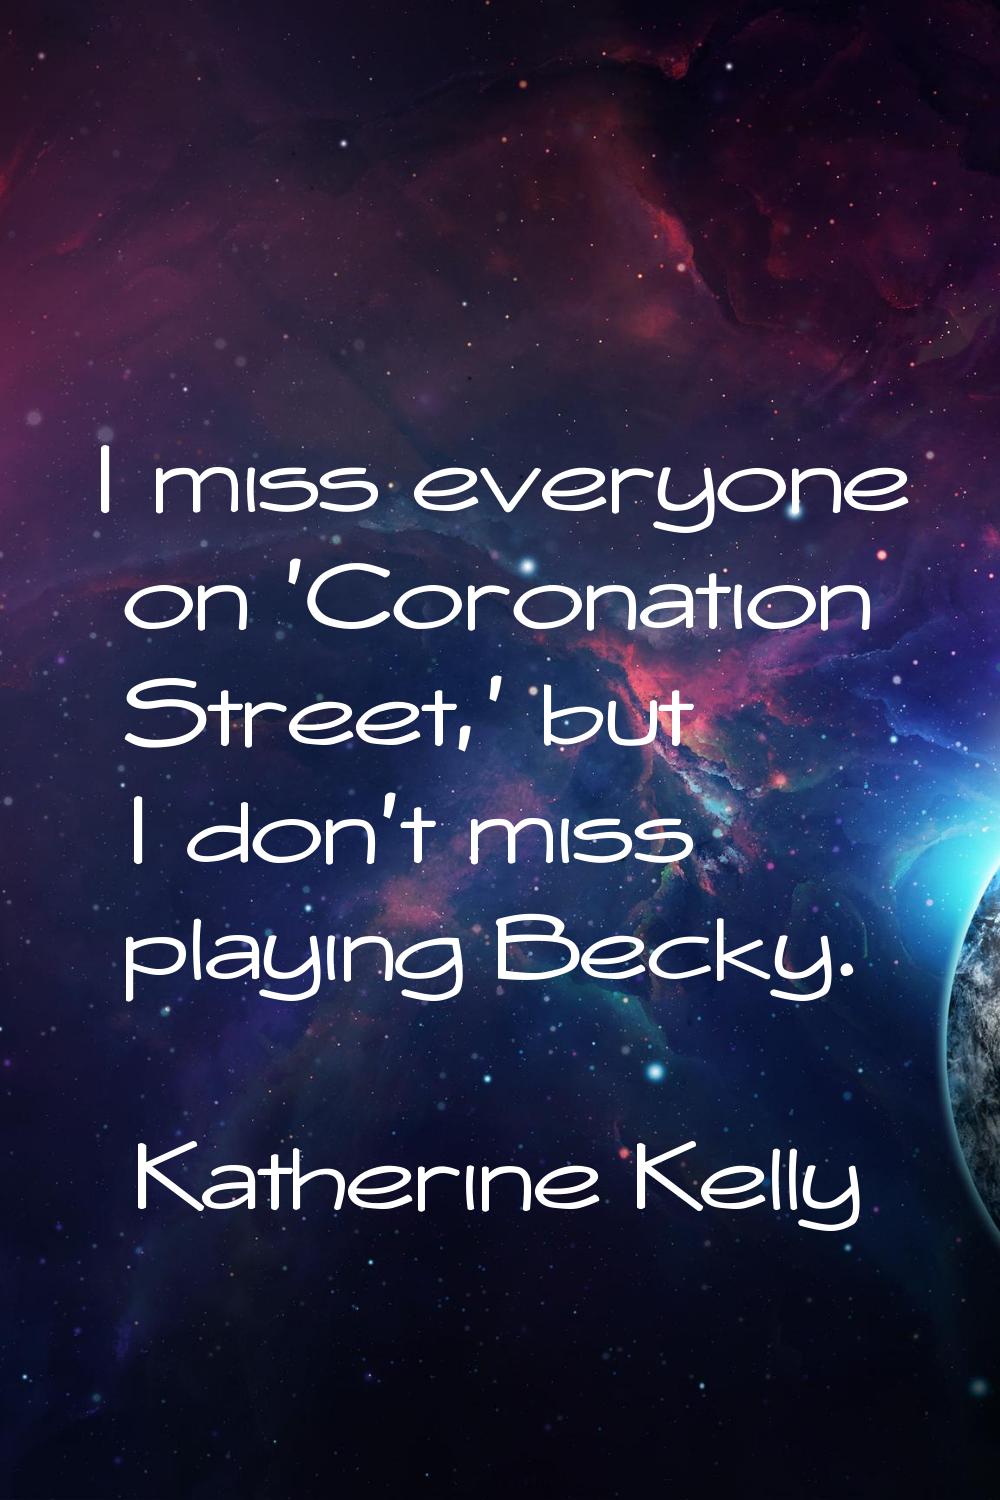 I miss everyone on 'Coronation Street,' but I don't miss playing Becky.